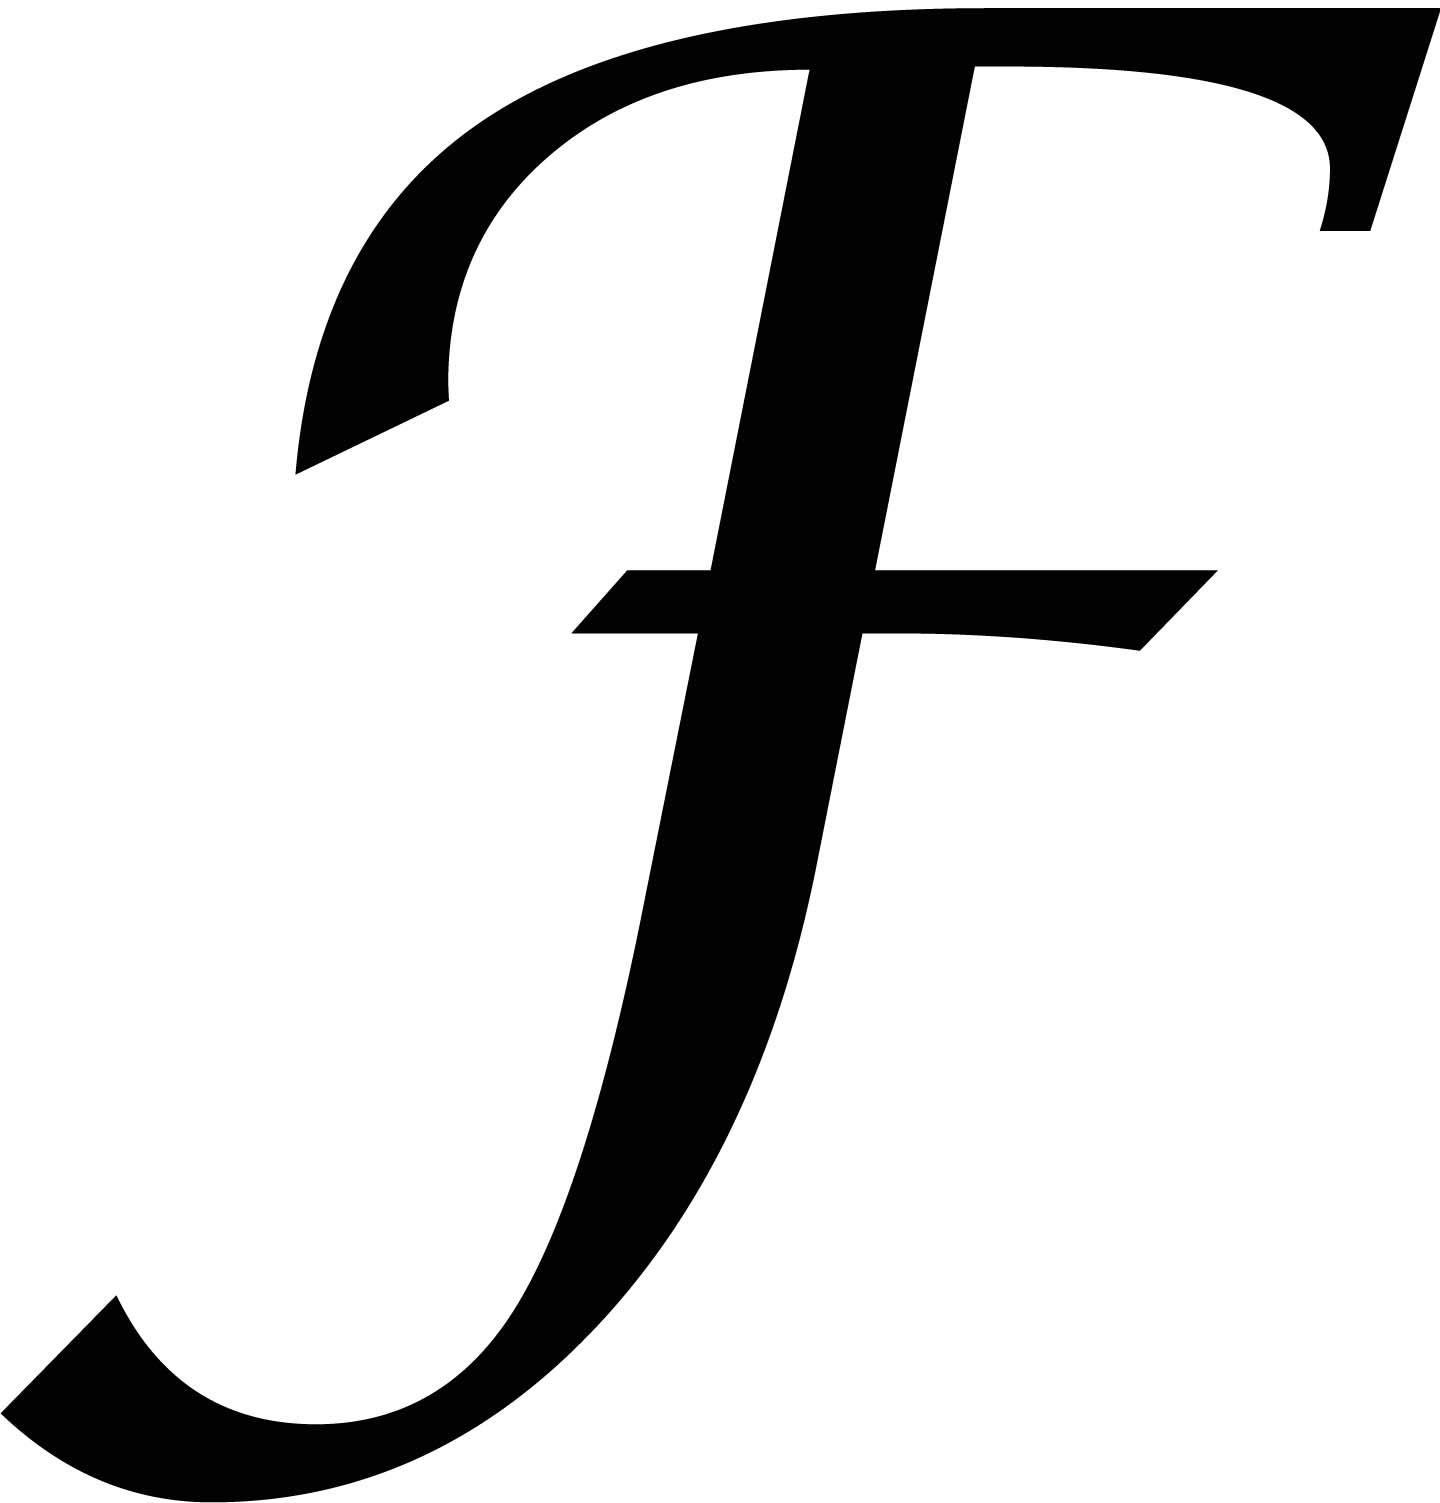 F. created a Letter F and printed it out. If you want one